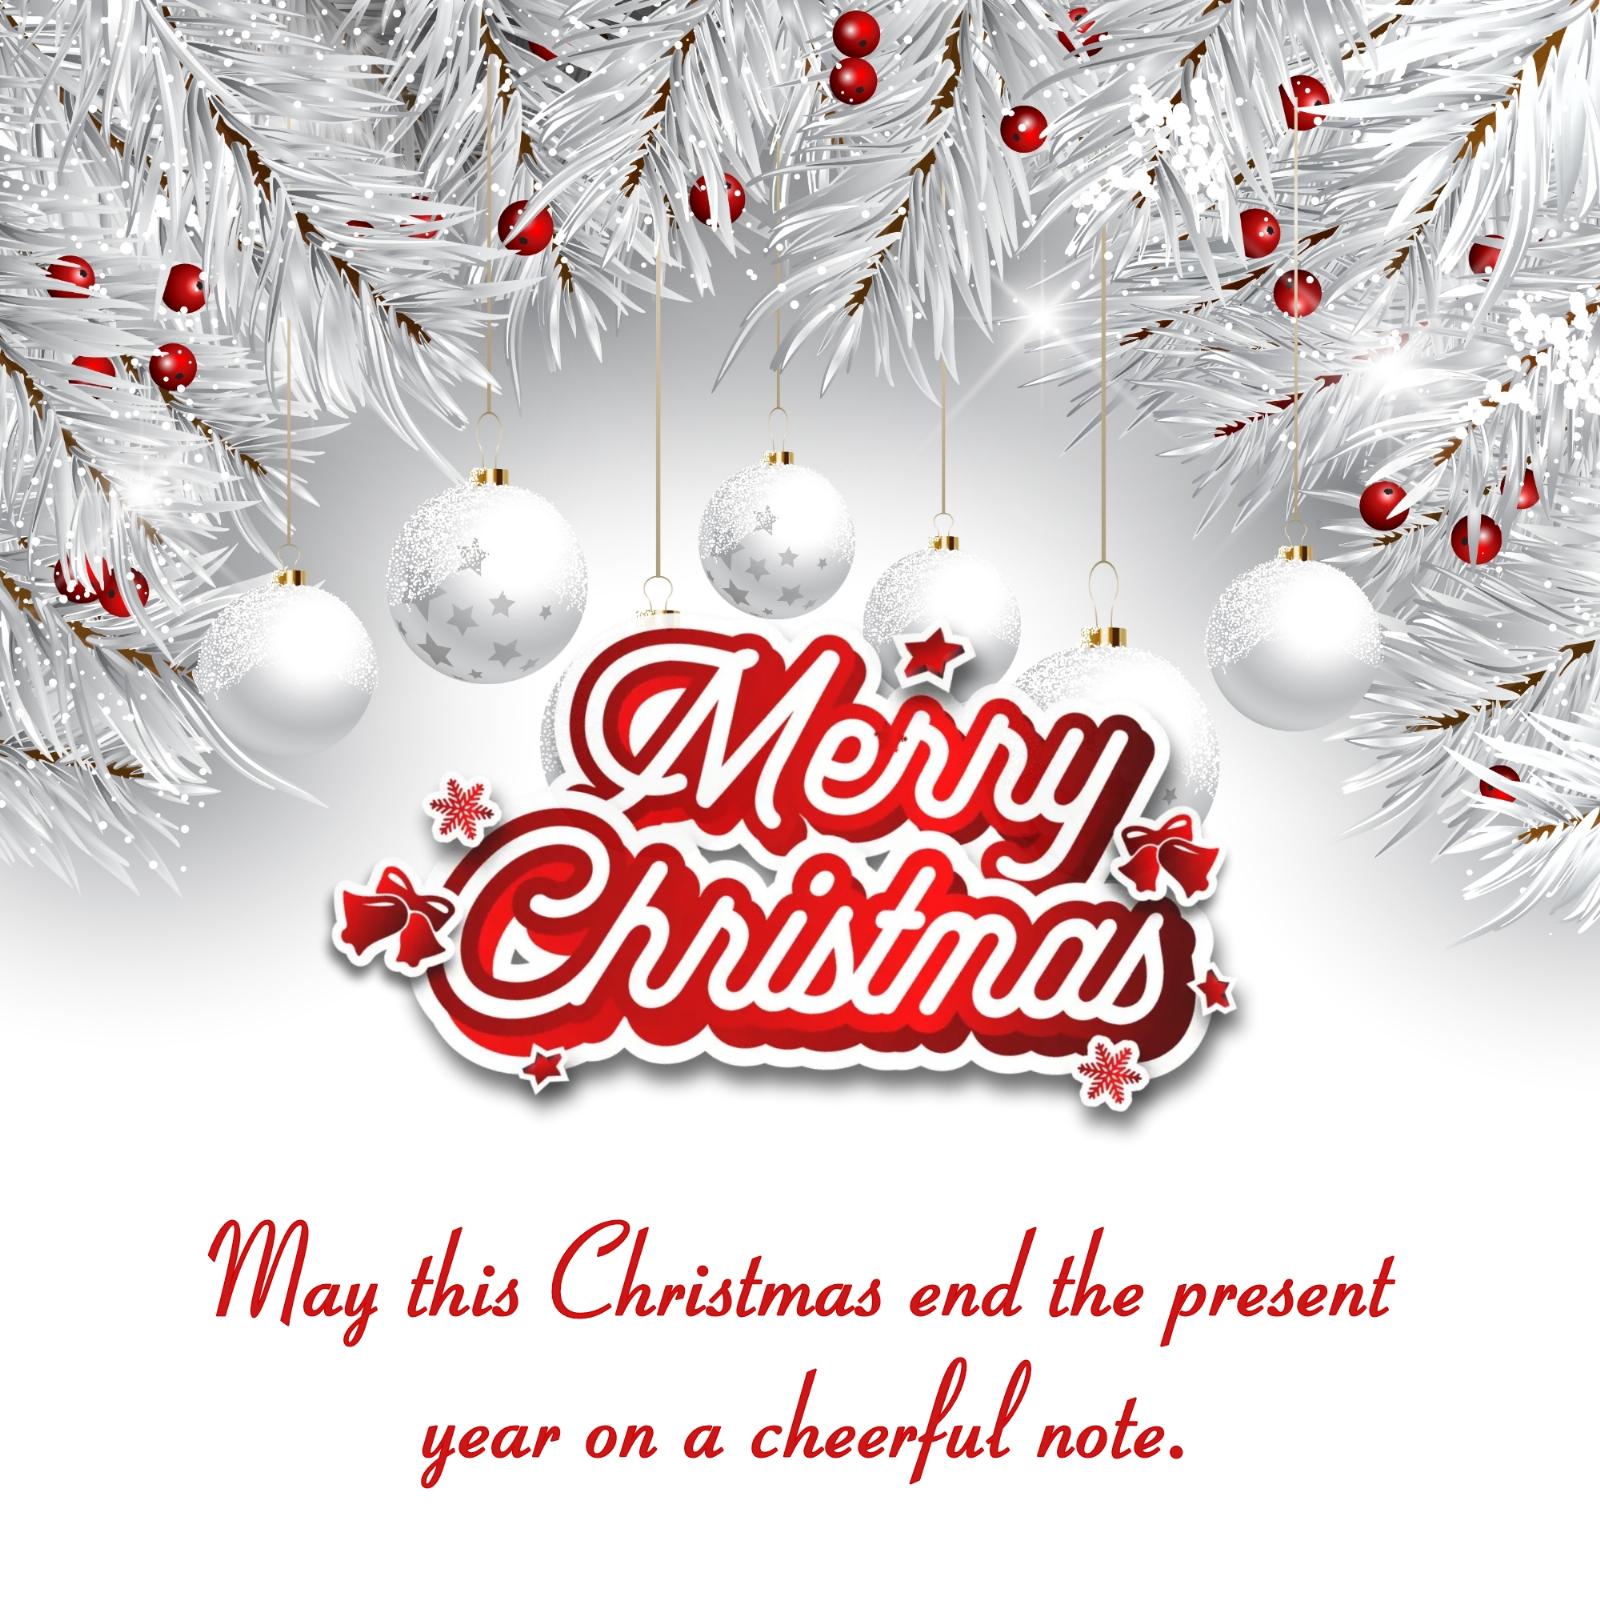 May this Christmas end the present year on a cheerful note